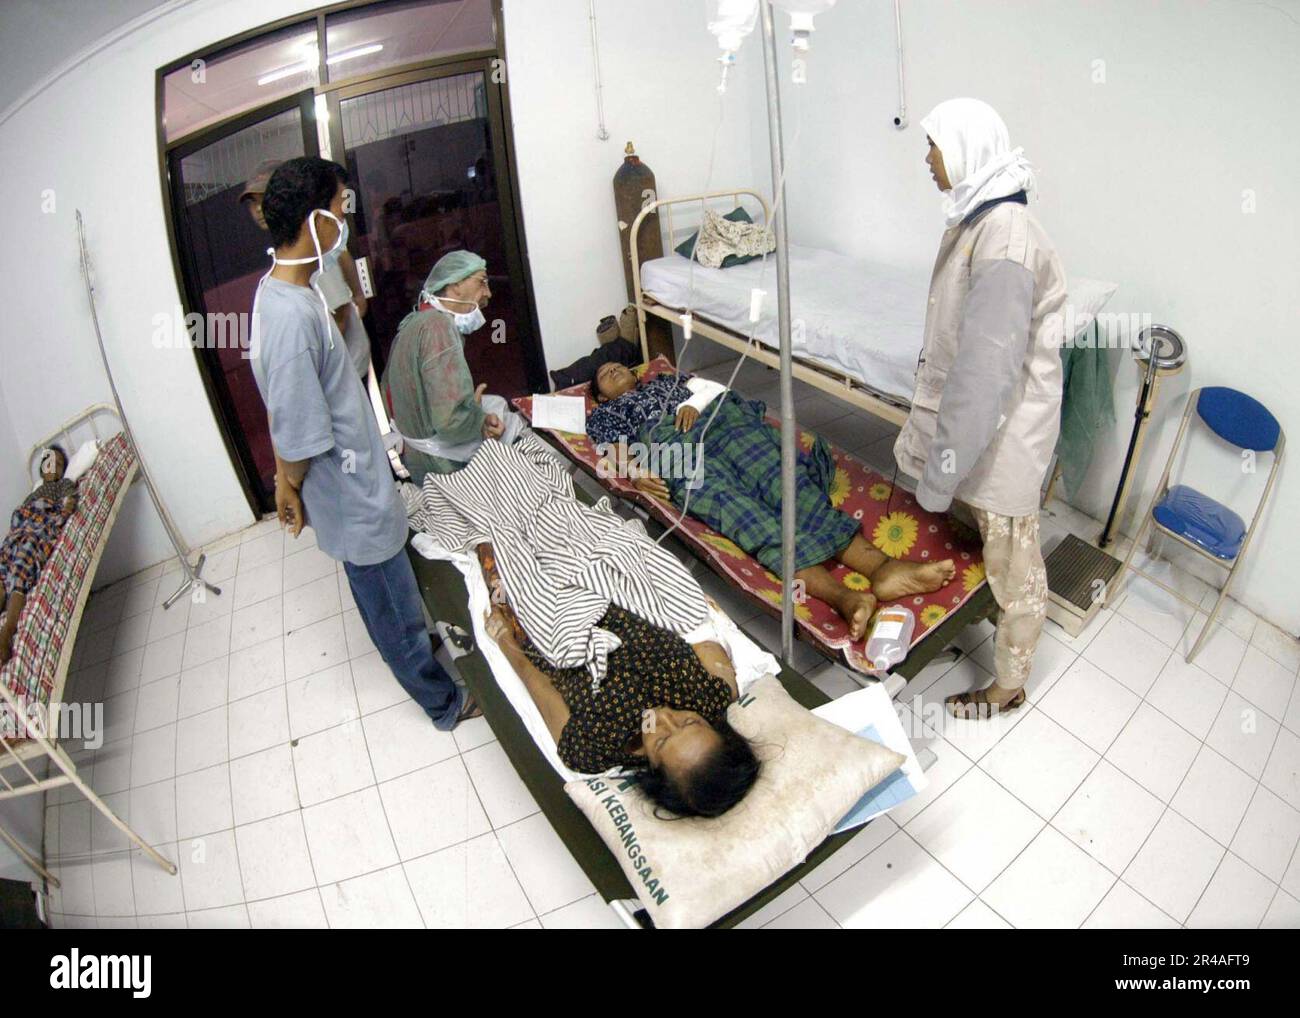 US Navy Dr. Paul Shumack from Brisband, Australia comforts a patient, after surgery on a wound she sustained during the Tsunami that hit coastal region of Aceh, Sumatra, Indonesia Stock Photo